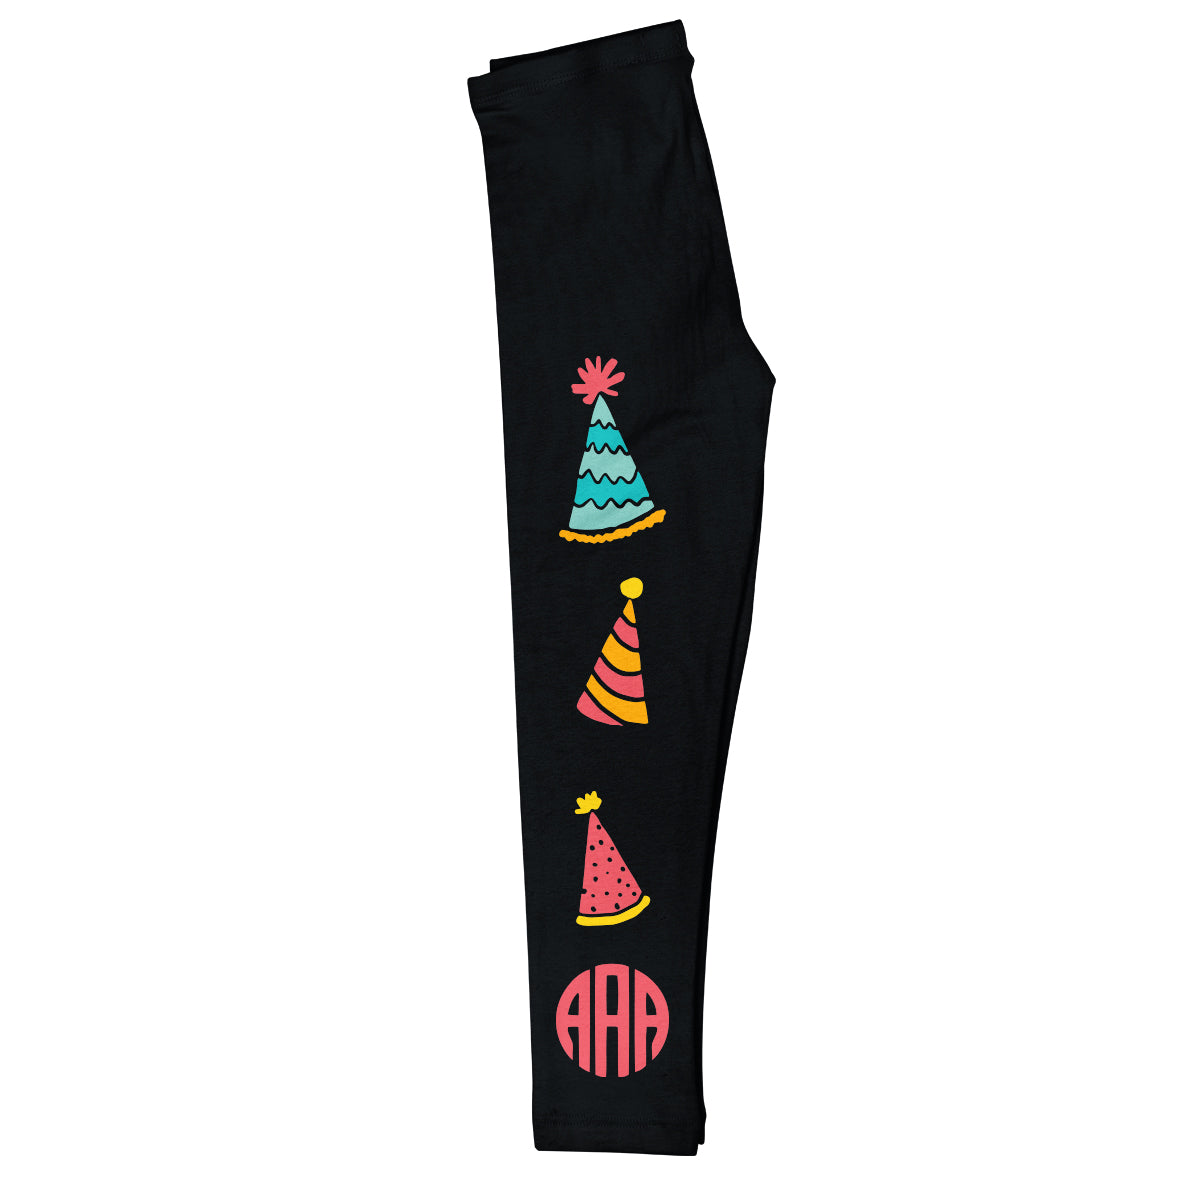 Black birthday leggings with party hats and monogram - Wimziy&Co.